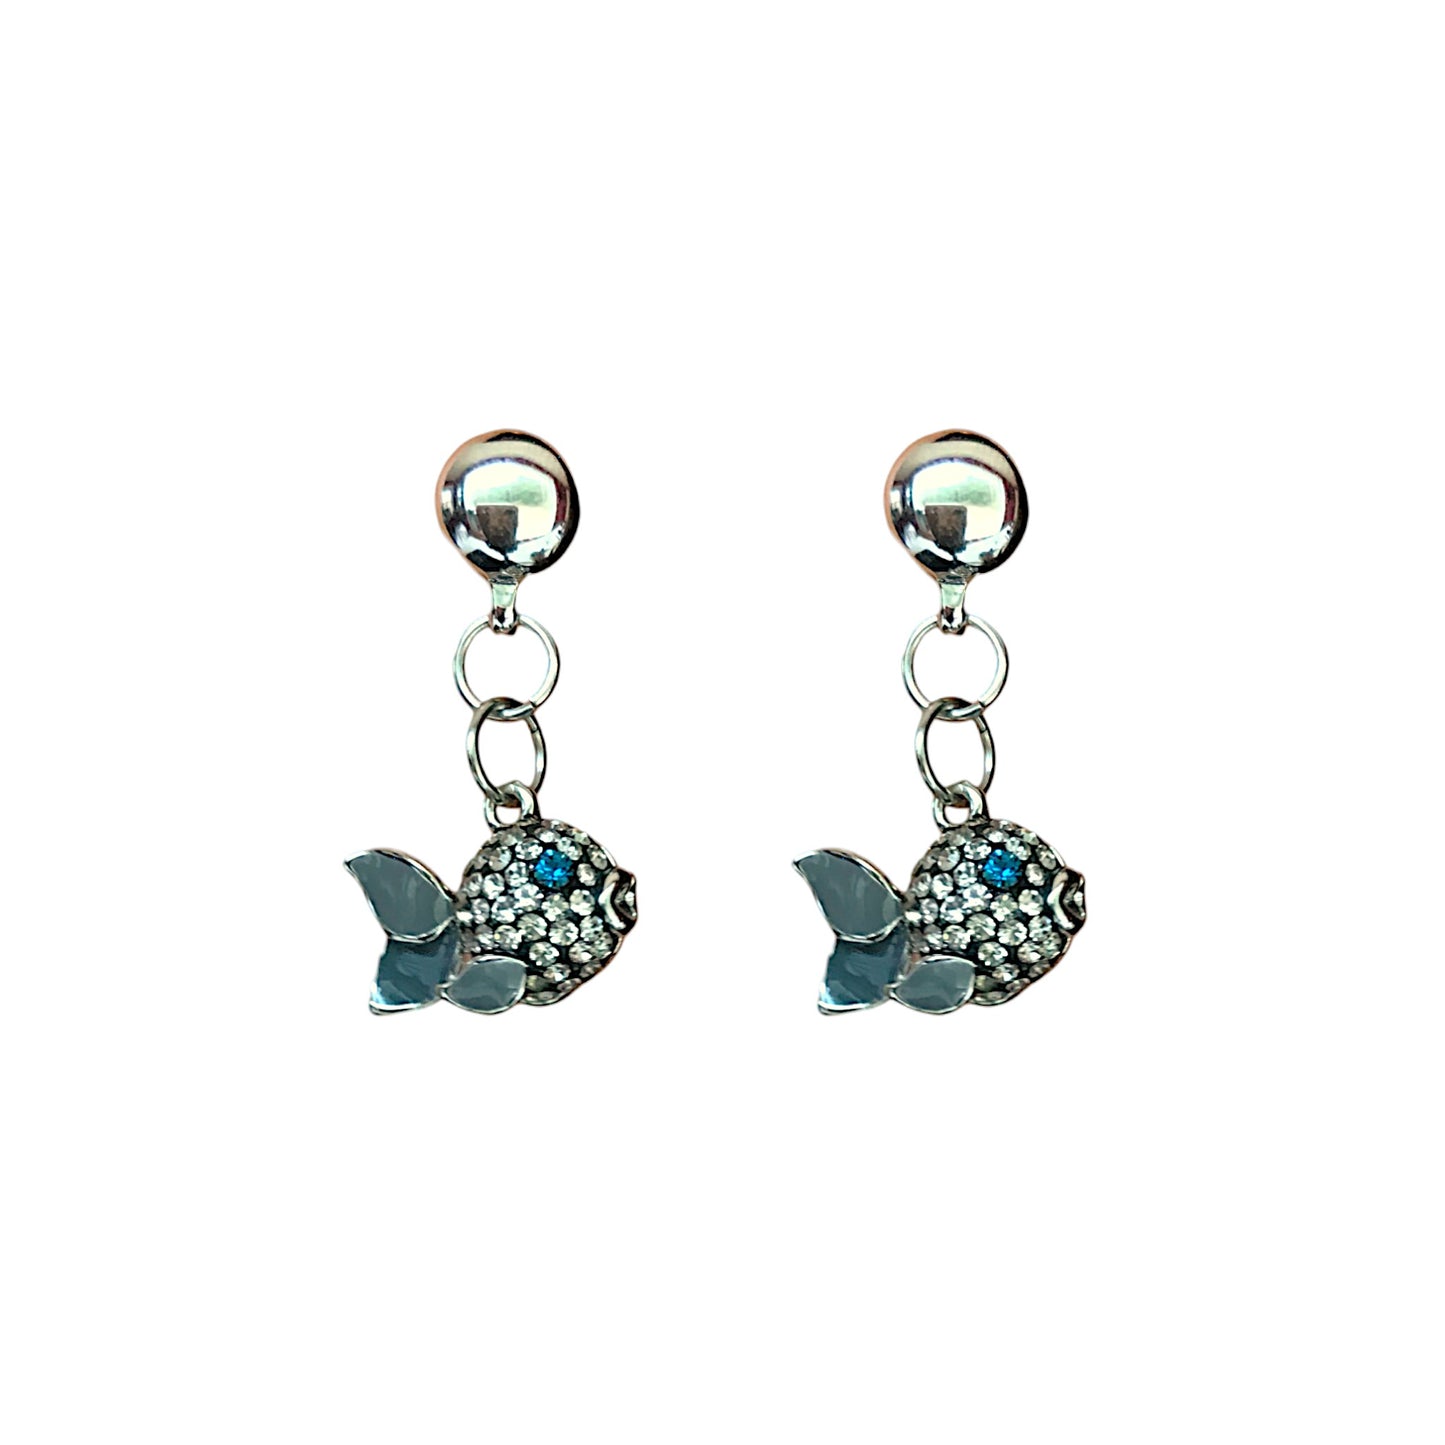 TI-GO Fish Charm earrings. Magnetic titanium interchangeable earring system. Detachable earrings for a truly hypoallergenic jewellery on a white background. grey